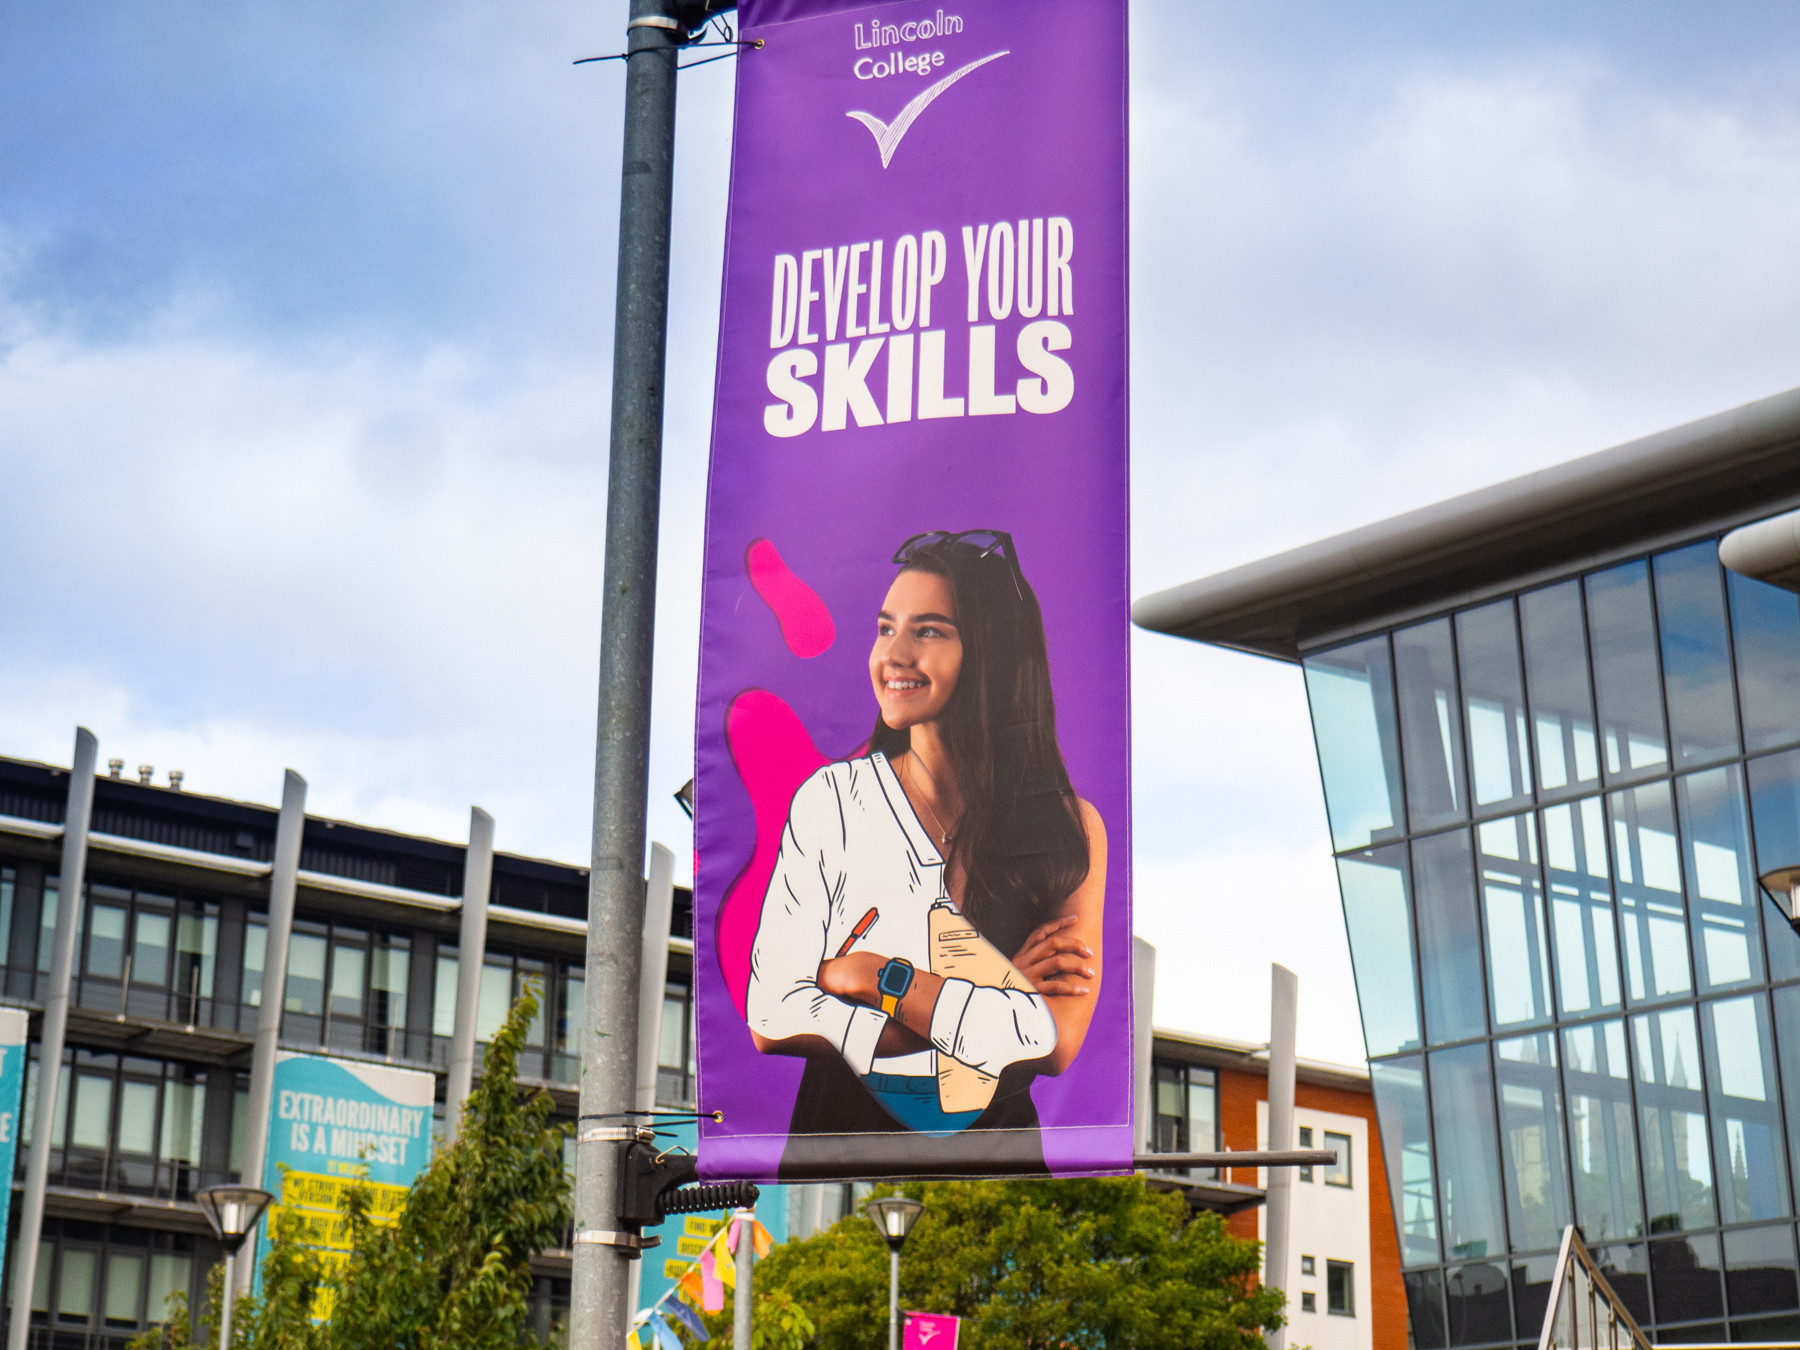 Lamp post flag banner design lincoln college education by root studio